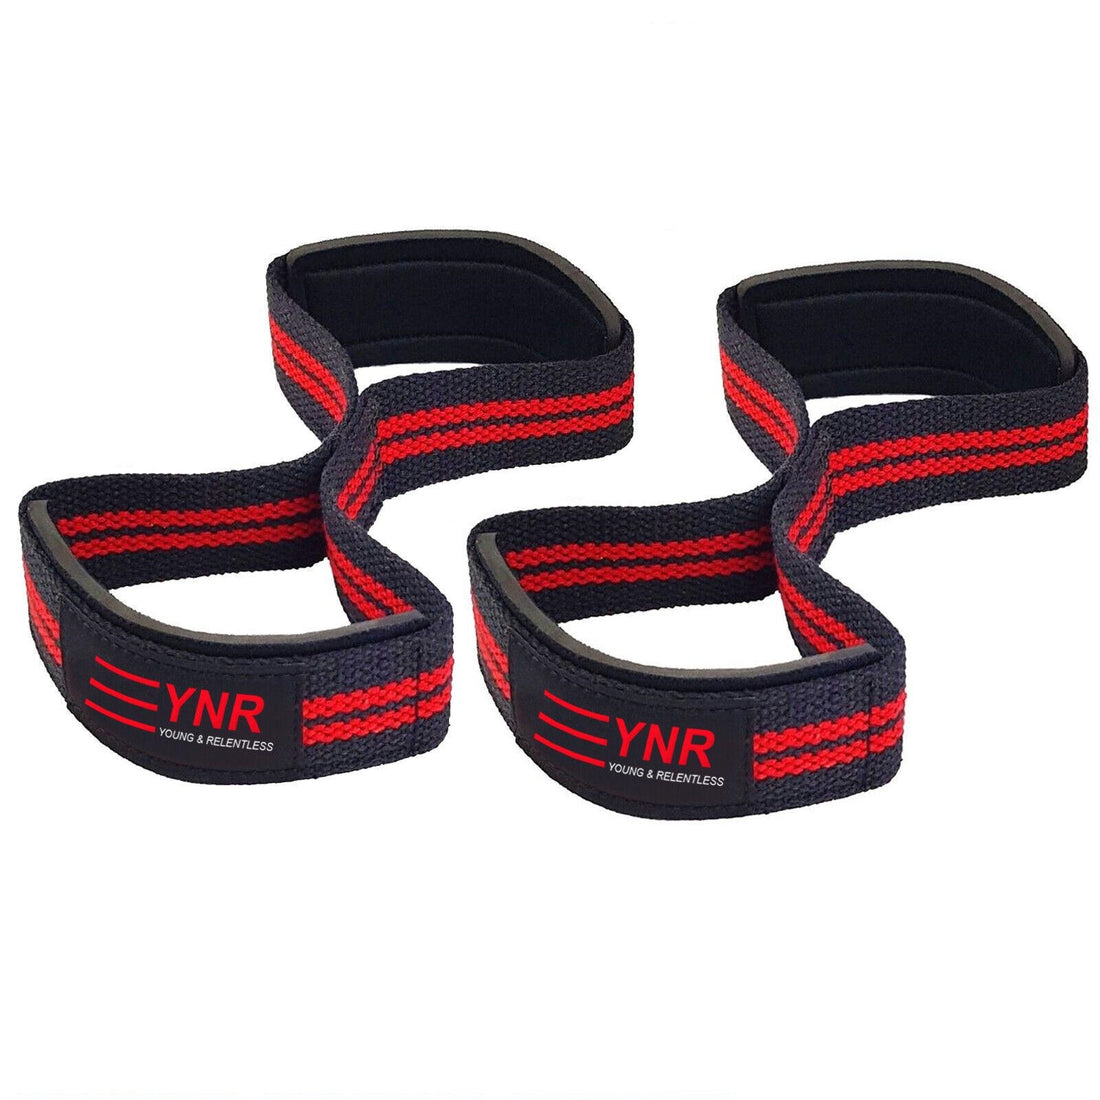 YNR Figure eight 8 Padded Cuff Weight Lifting Wrist Straps Gym Deadlift Double Loop